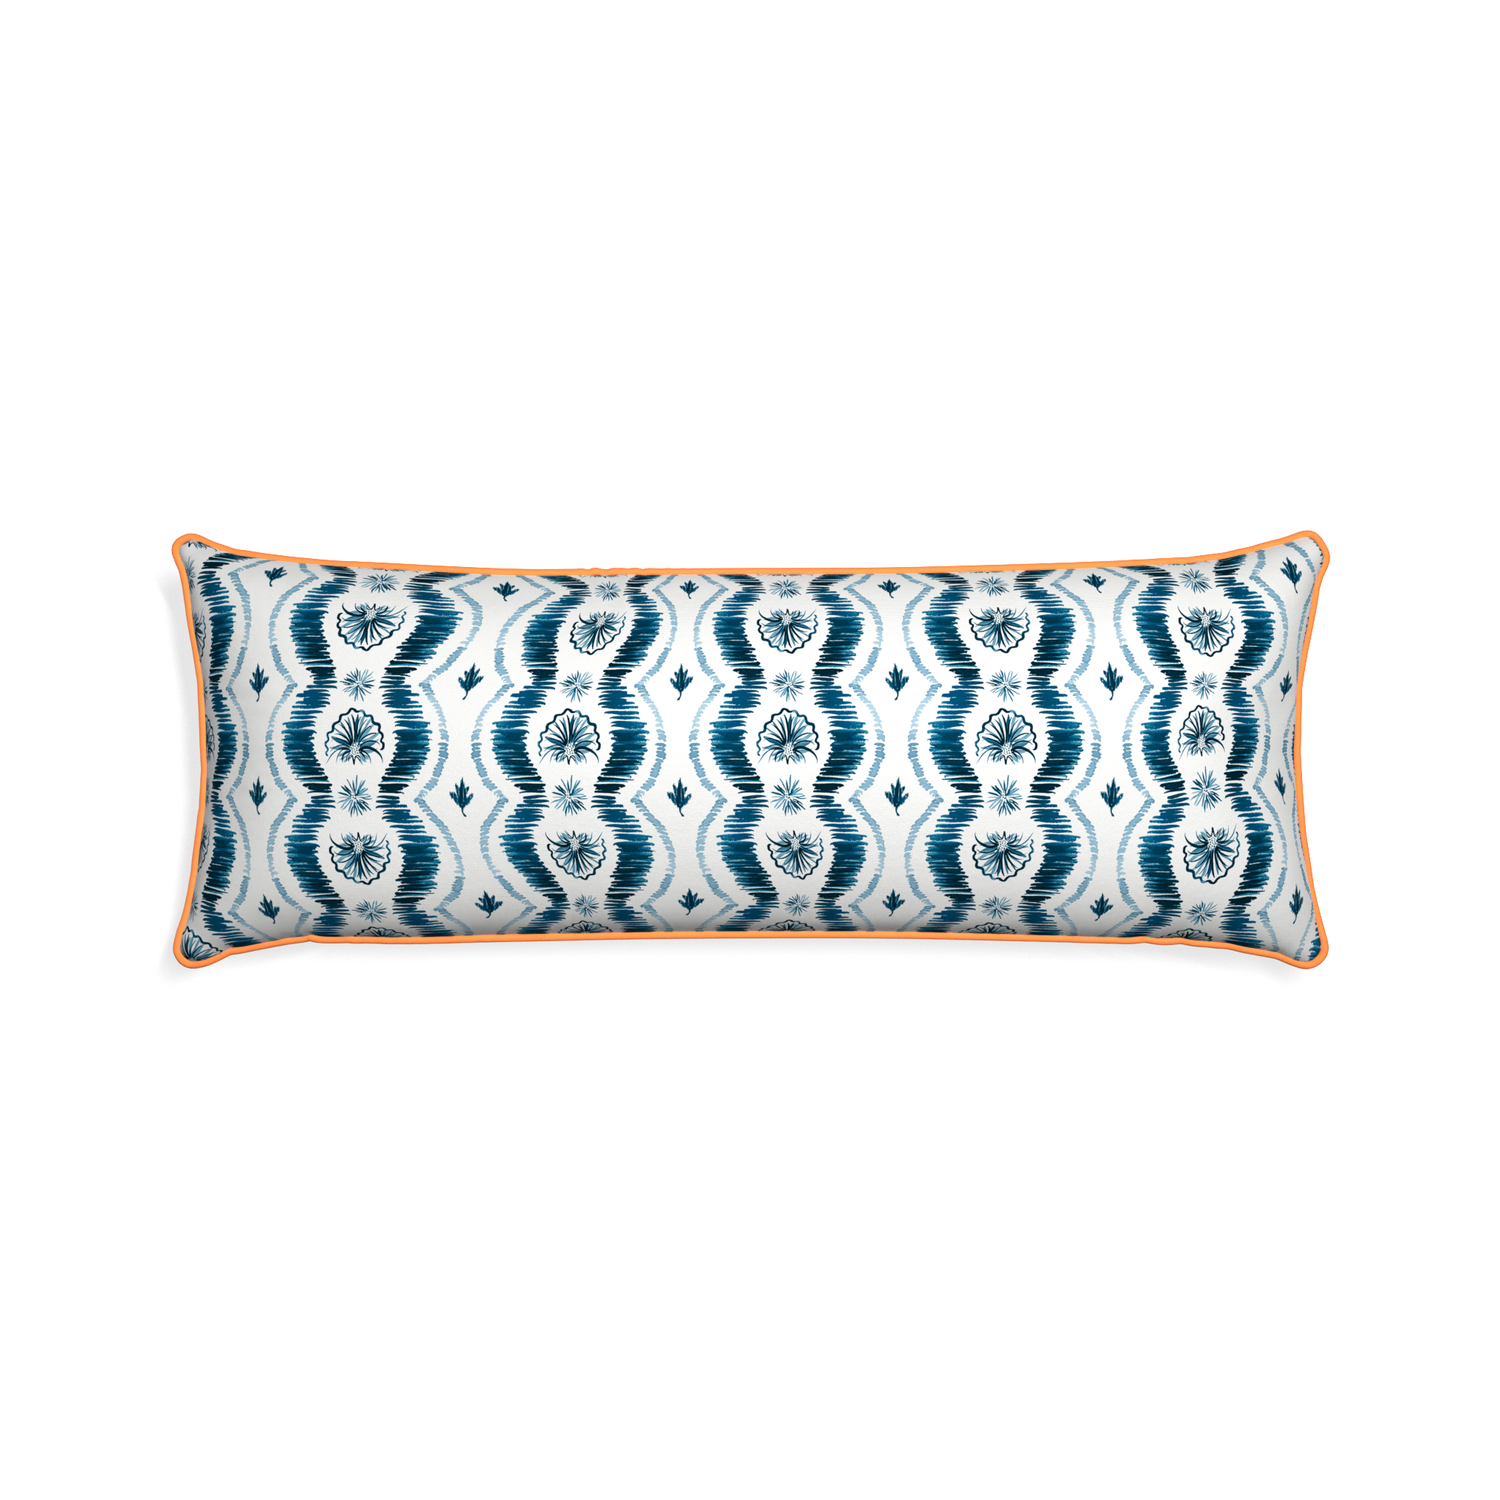 Xl-lumbar alice custom pillow with clementine piping on white background